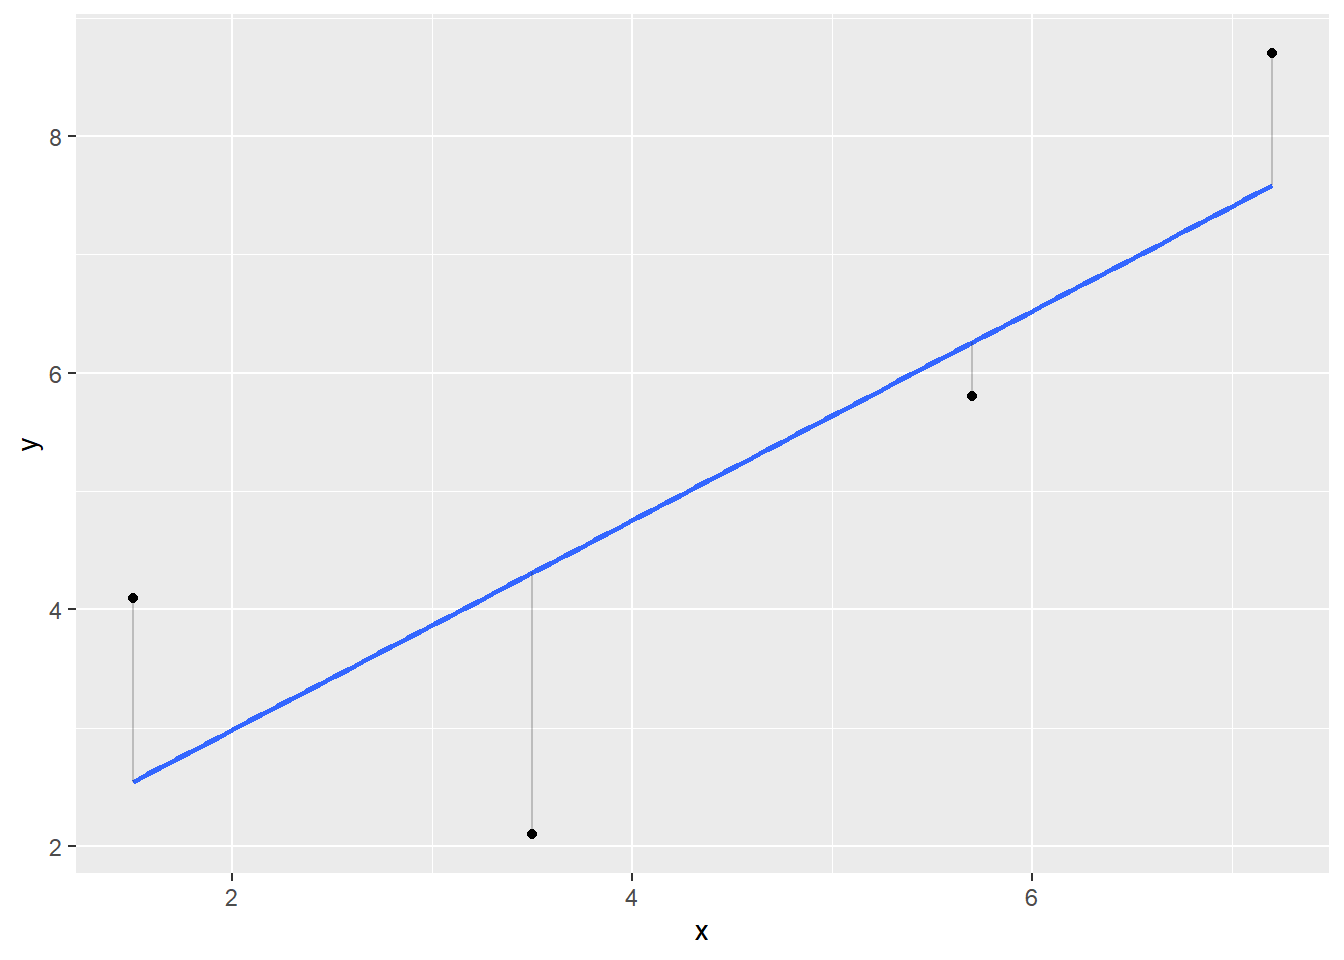 Regression line (blue) with observed values (black) and residual values representing the vertical distance between observed values and the regression line.